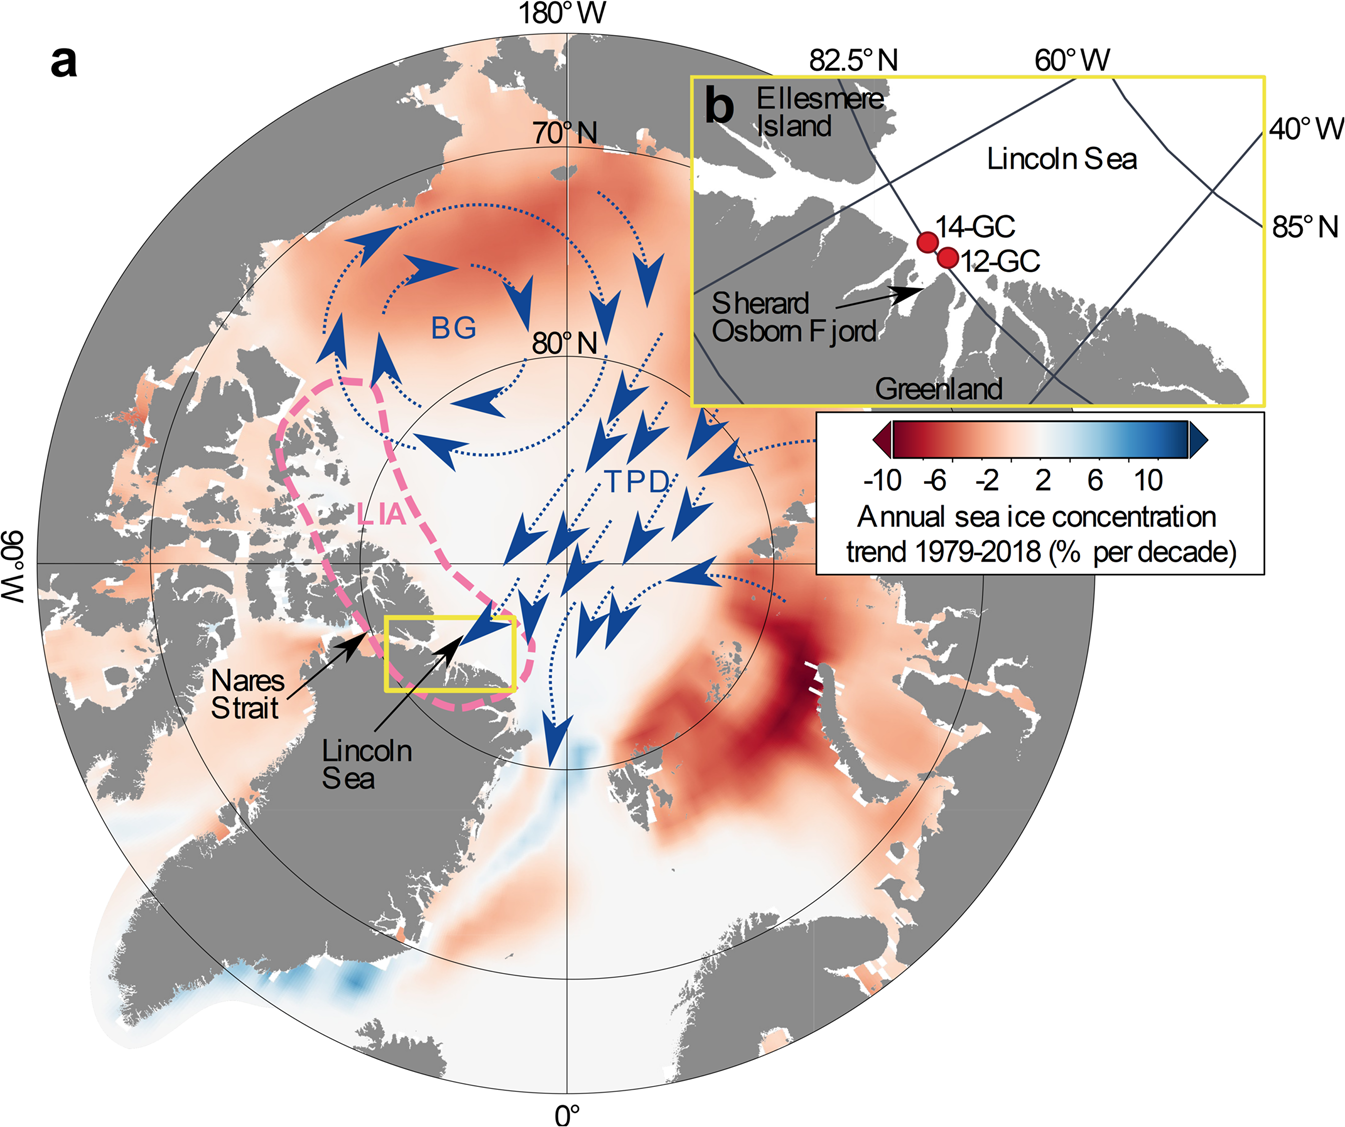 Seasonal sea-ice in the Arctic's last ice area during the Early Holocene |  Communications Earth & Environment